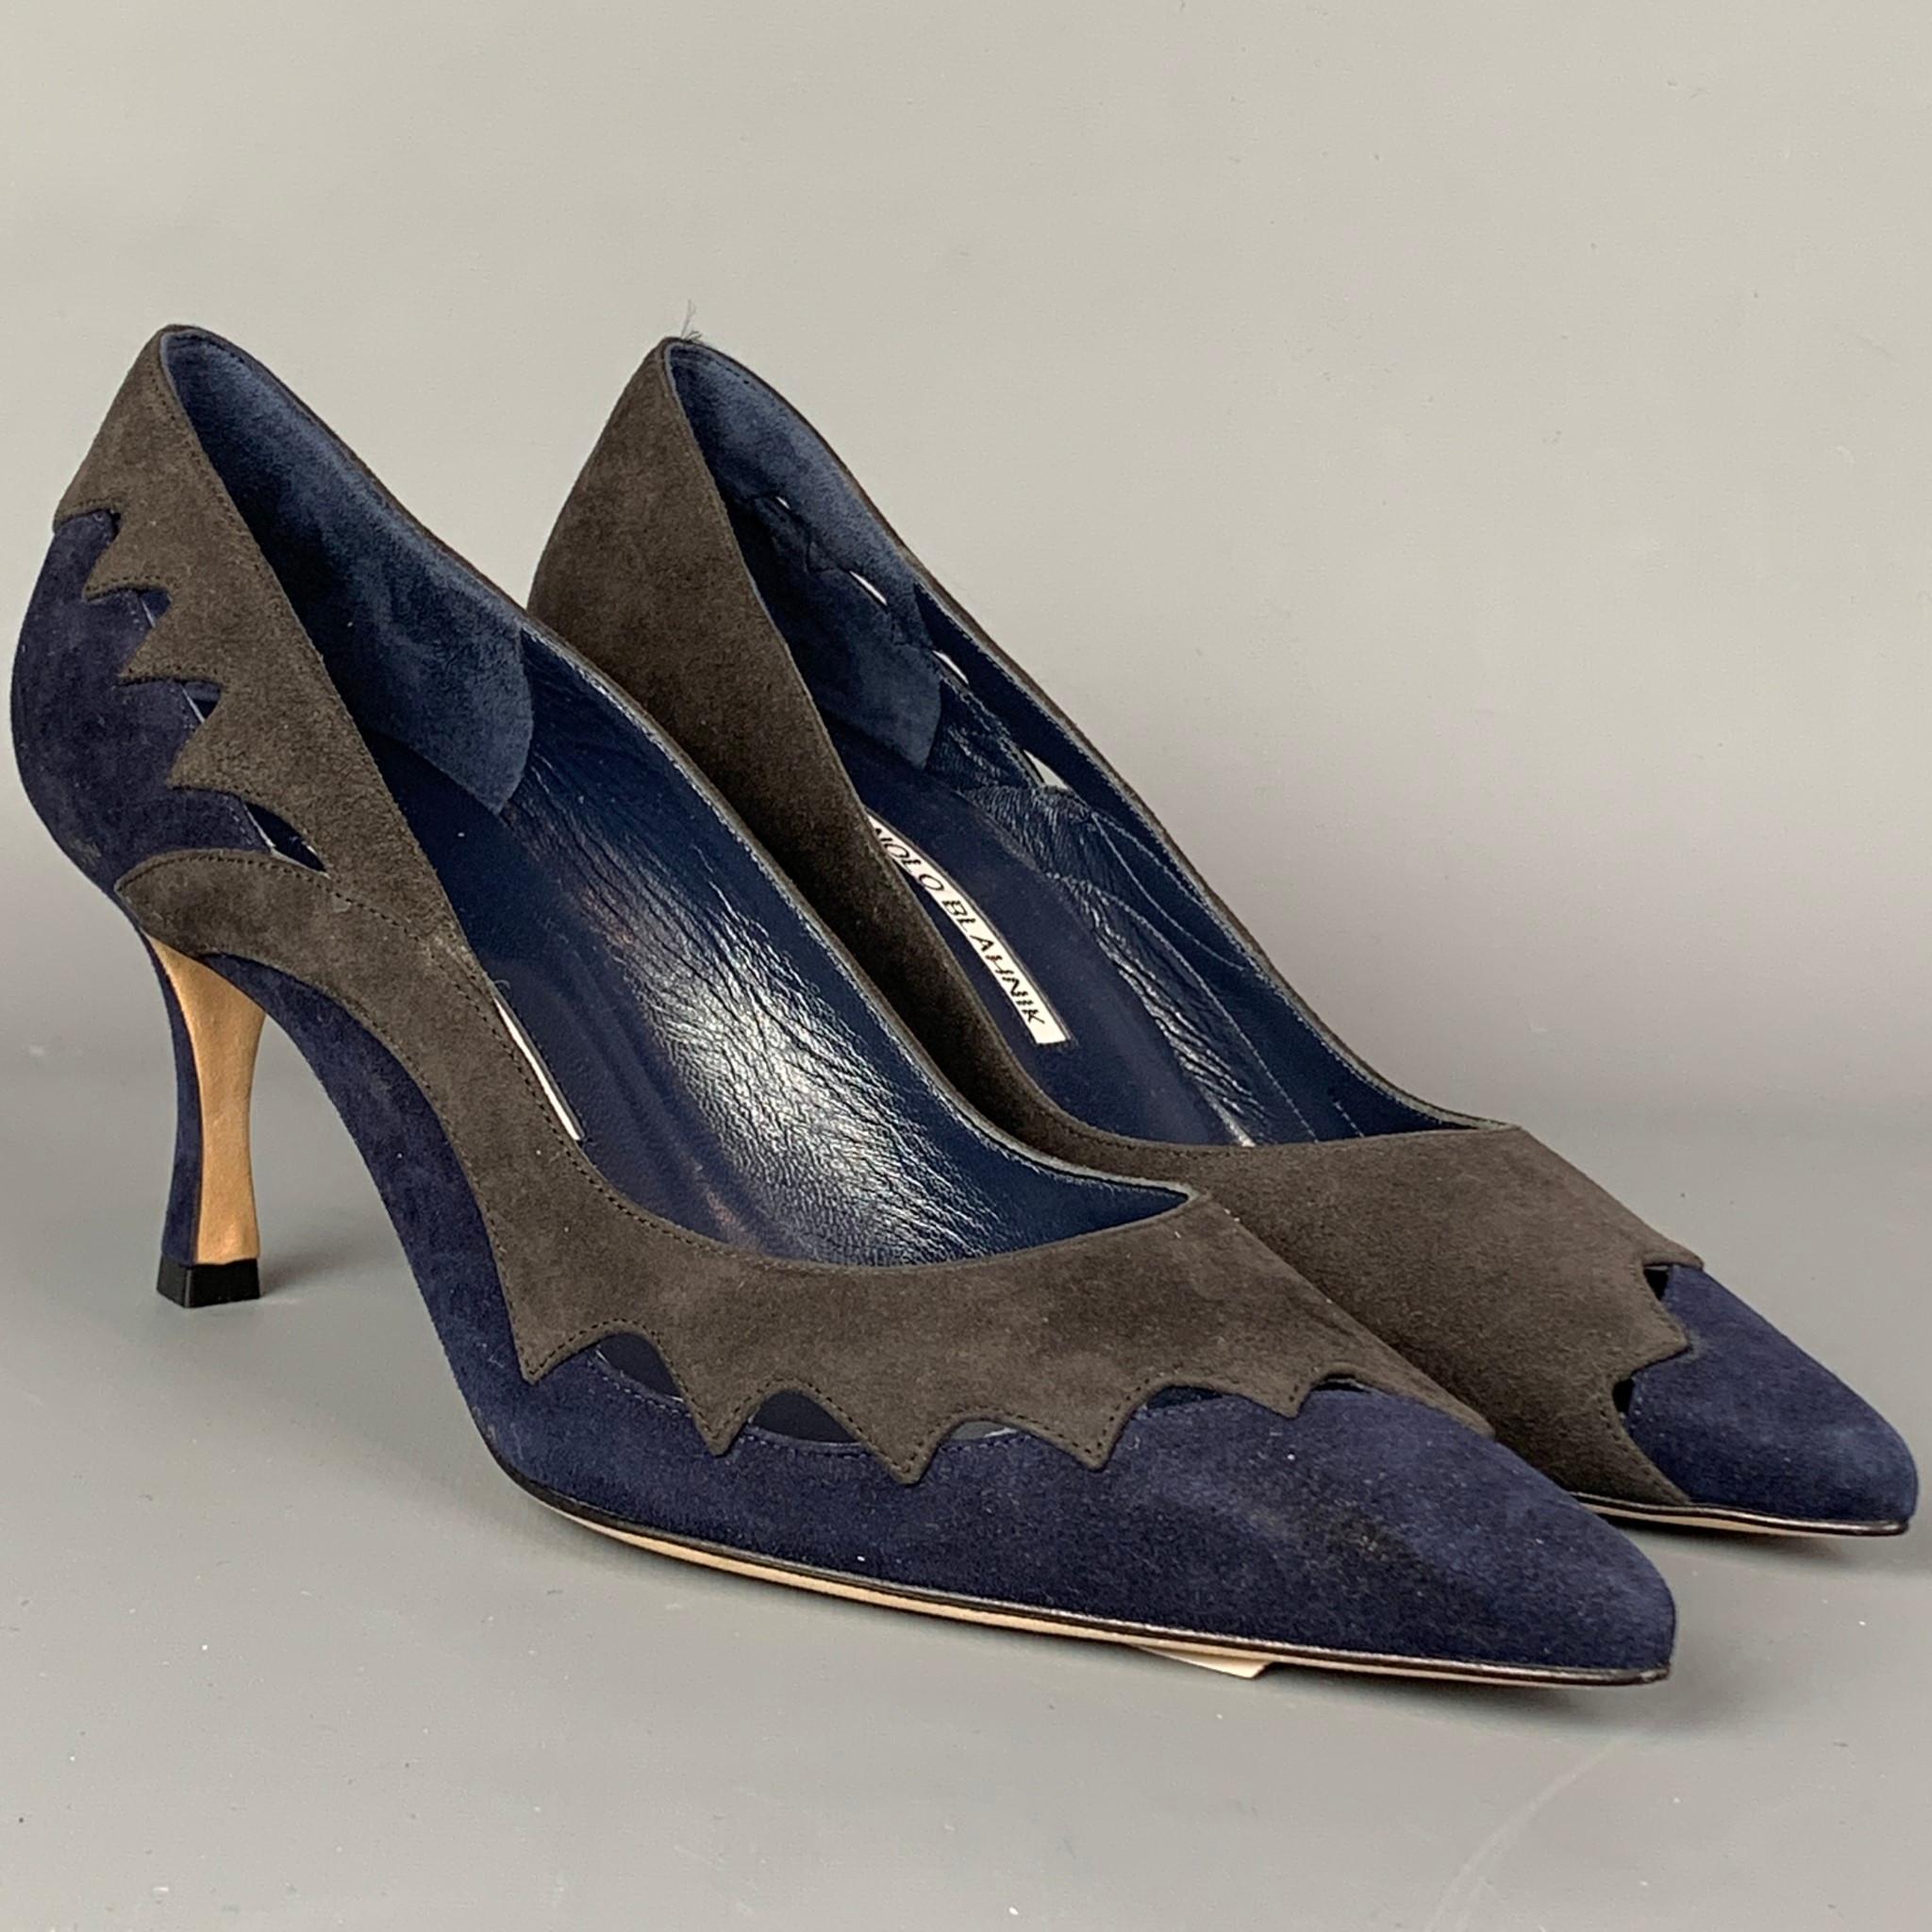 MANOLO BLAHNIK pumps comes in a grey & navy suede with cut out details featuring a pointed toe and a stacked heel. Comes with dust bag. Handmade in Italy.  Retail $645

Very Good Pre-Owned Condition. Light marks at side.
Marked: IT